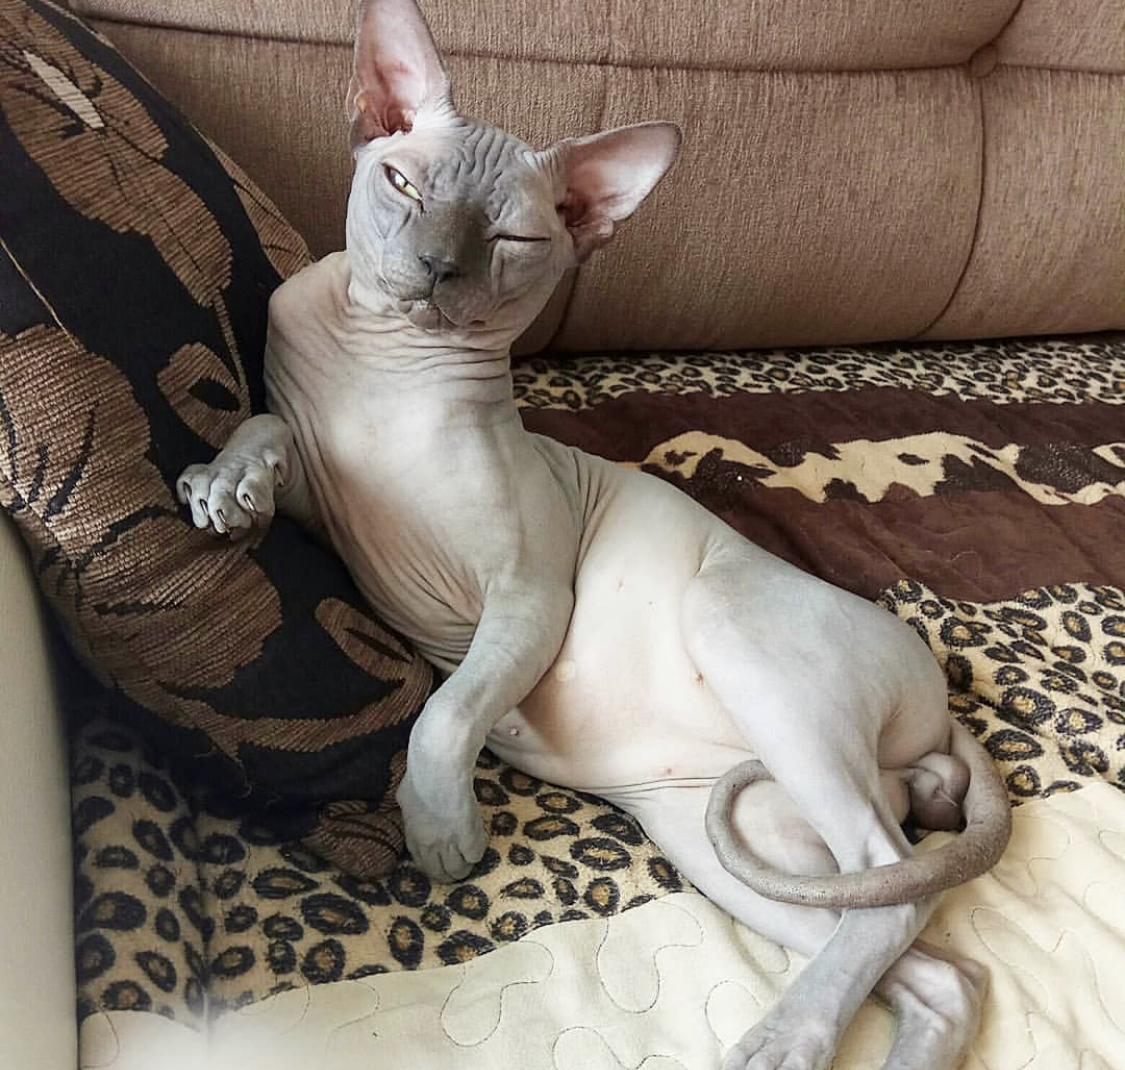 winking Sphynx while sitting on the couch